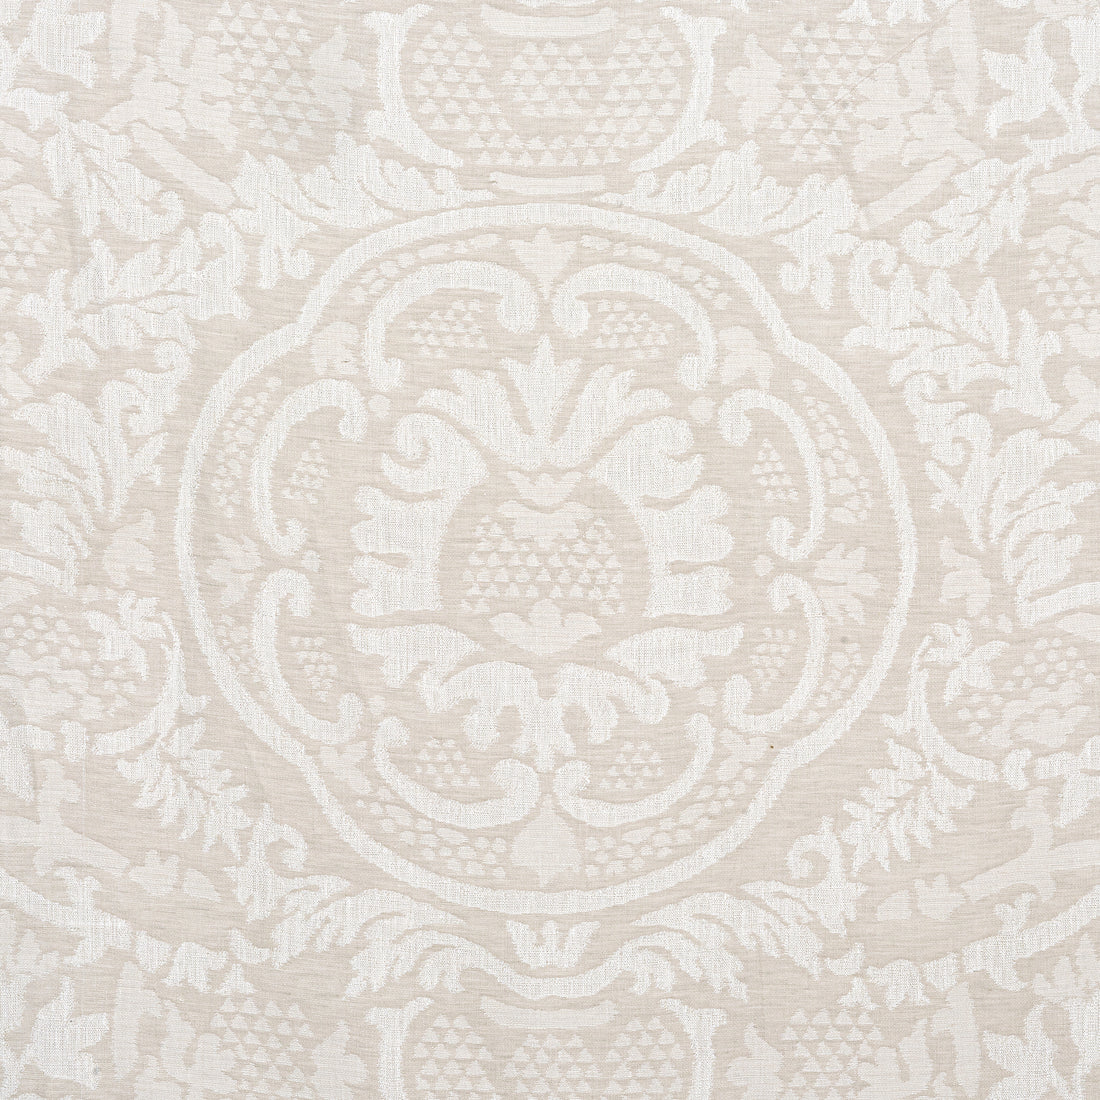 Earl Damask fabric in flax color - pattern number W710841 - by Thibaut in the Heritage collection